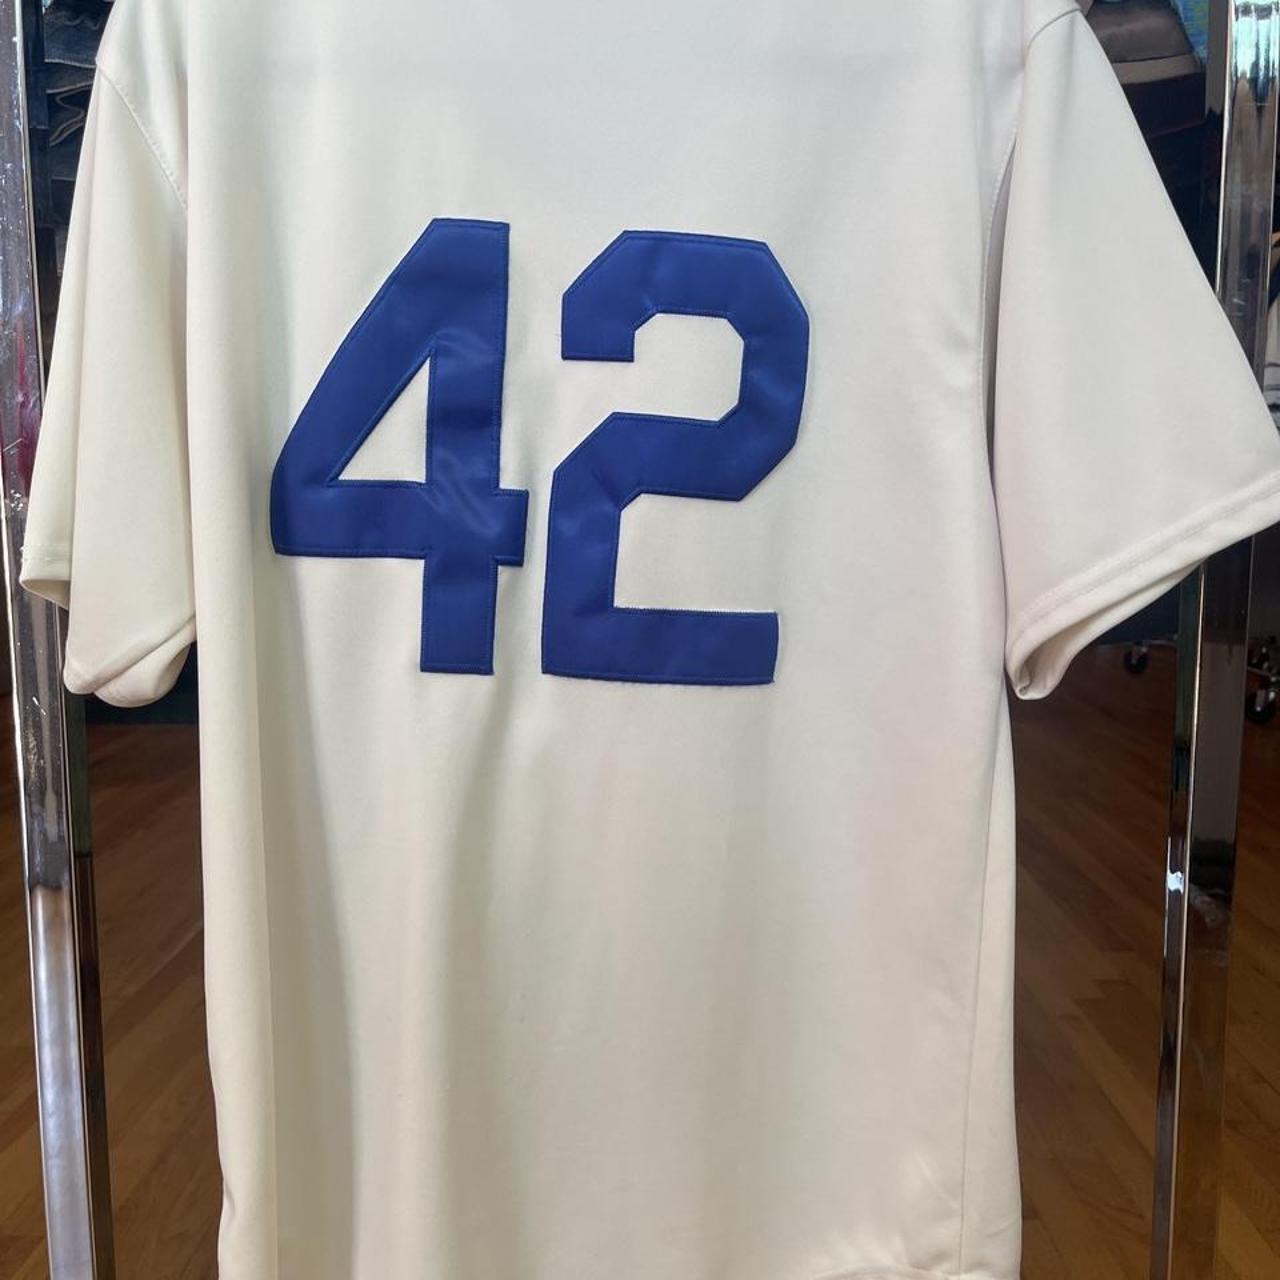 Vintage 1955 Jackie Robinson jersey made by Mitchell - Depop